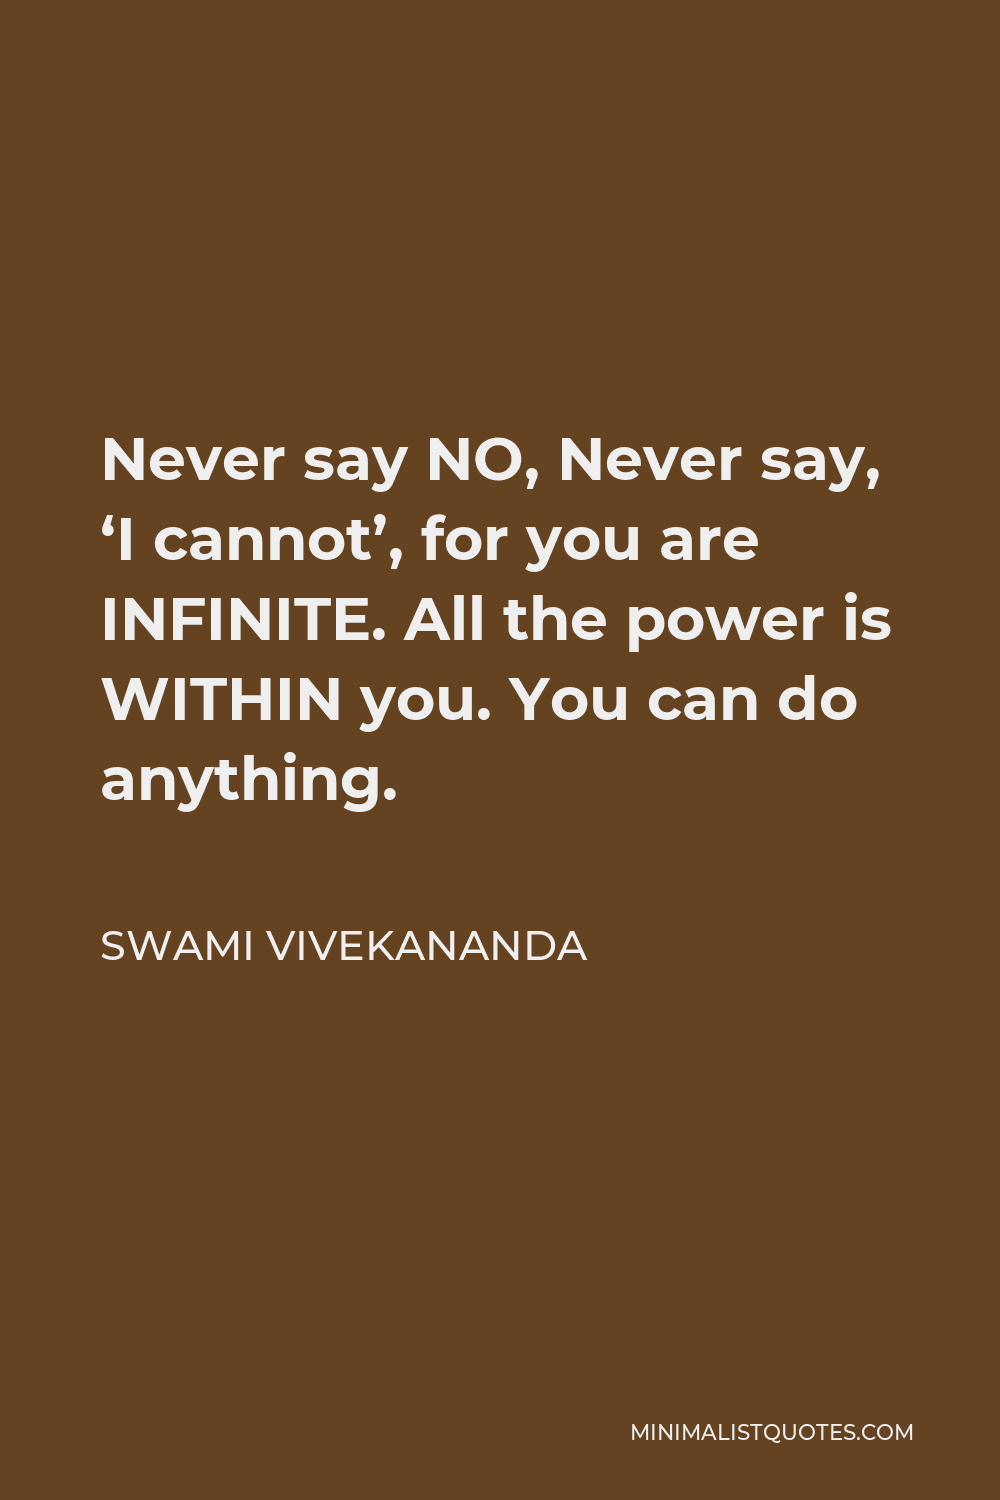 Swami Vivekananda Quote - Never say NO, Never say, ‘I cannot’, for you are INFINITE. All the power is WITHIN you. You can do anything.